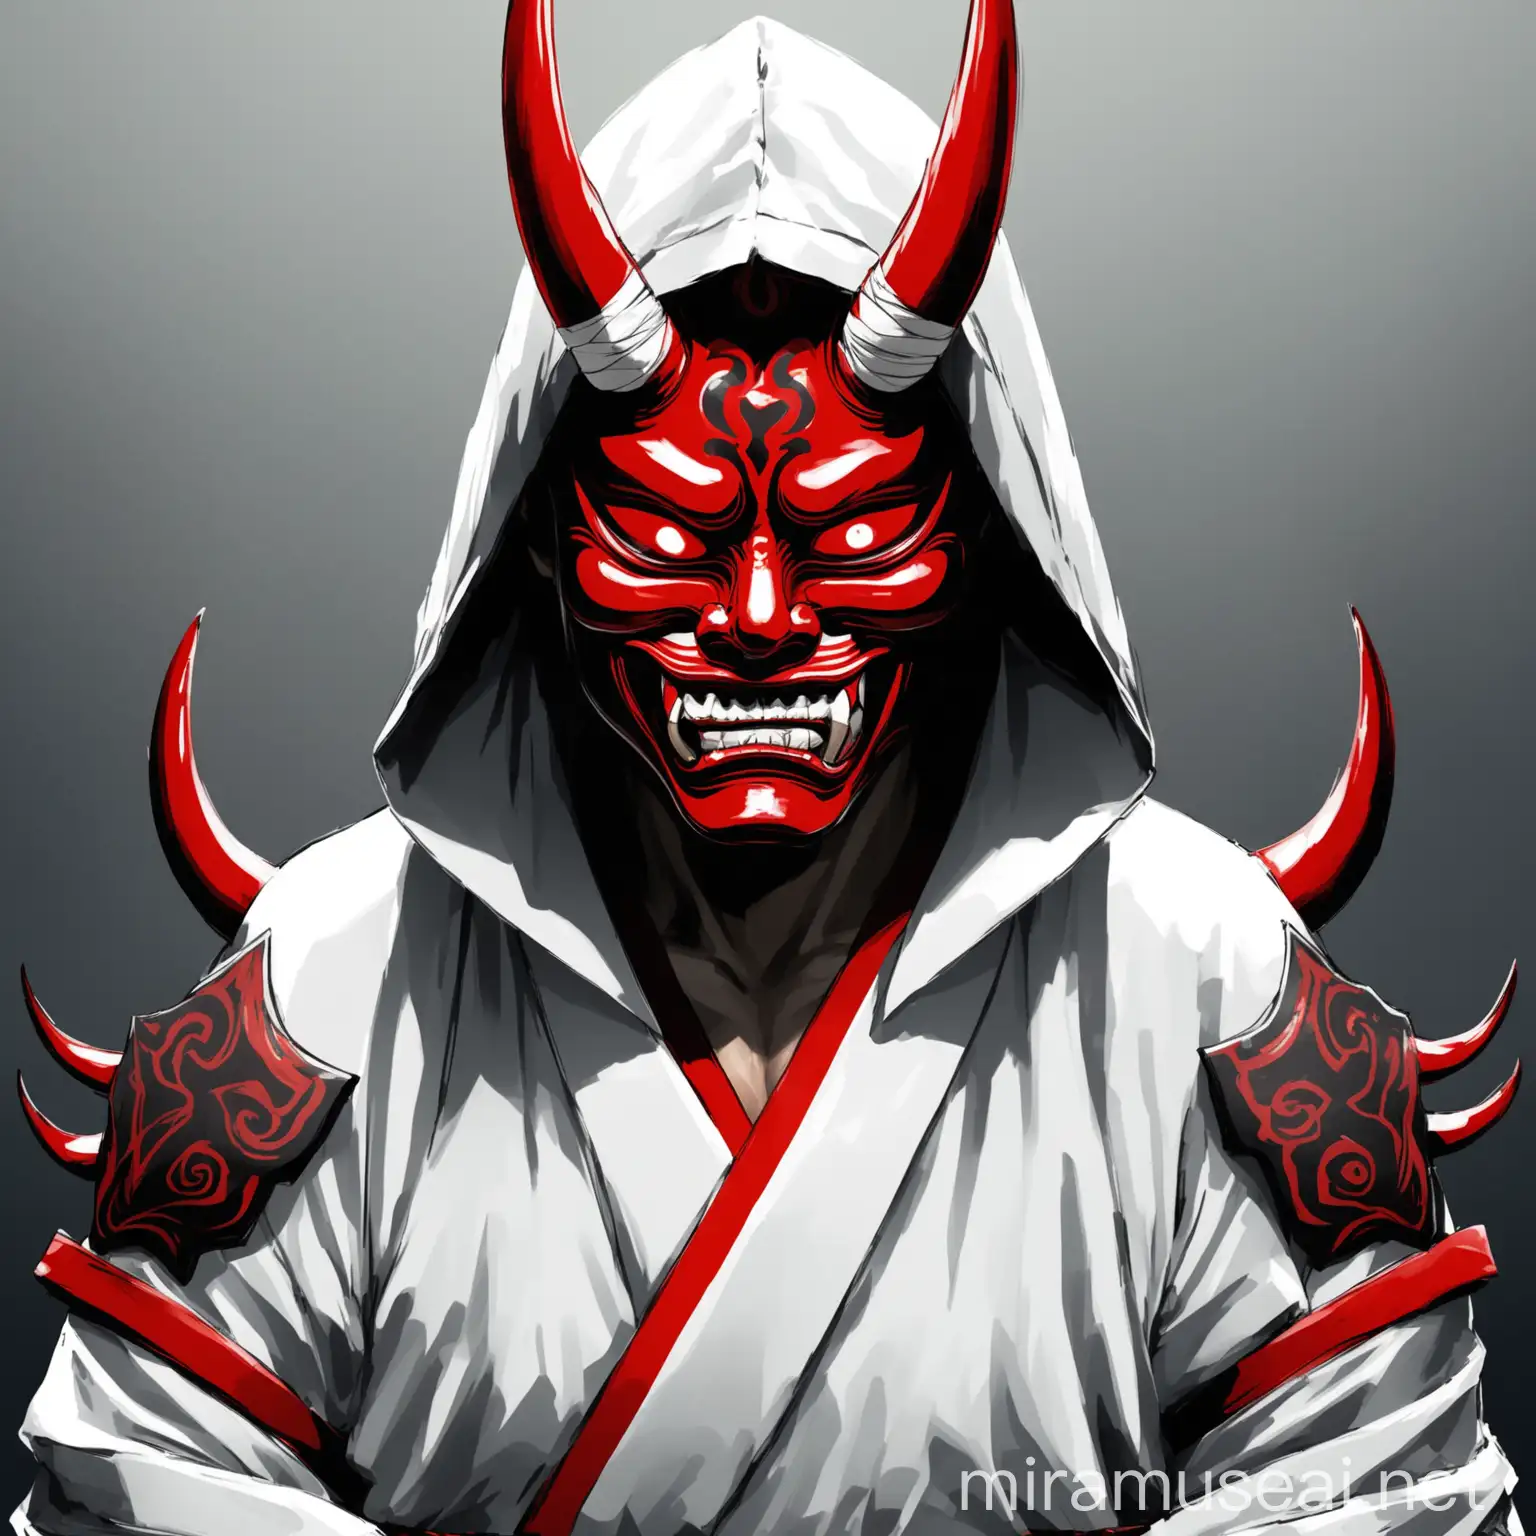 Man with red Oni mask, white kimono and bandages on both arms and hood